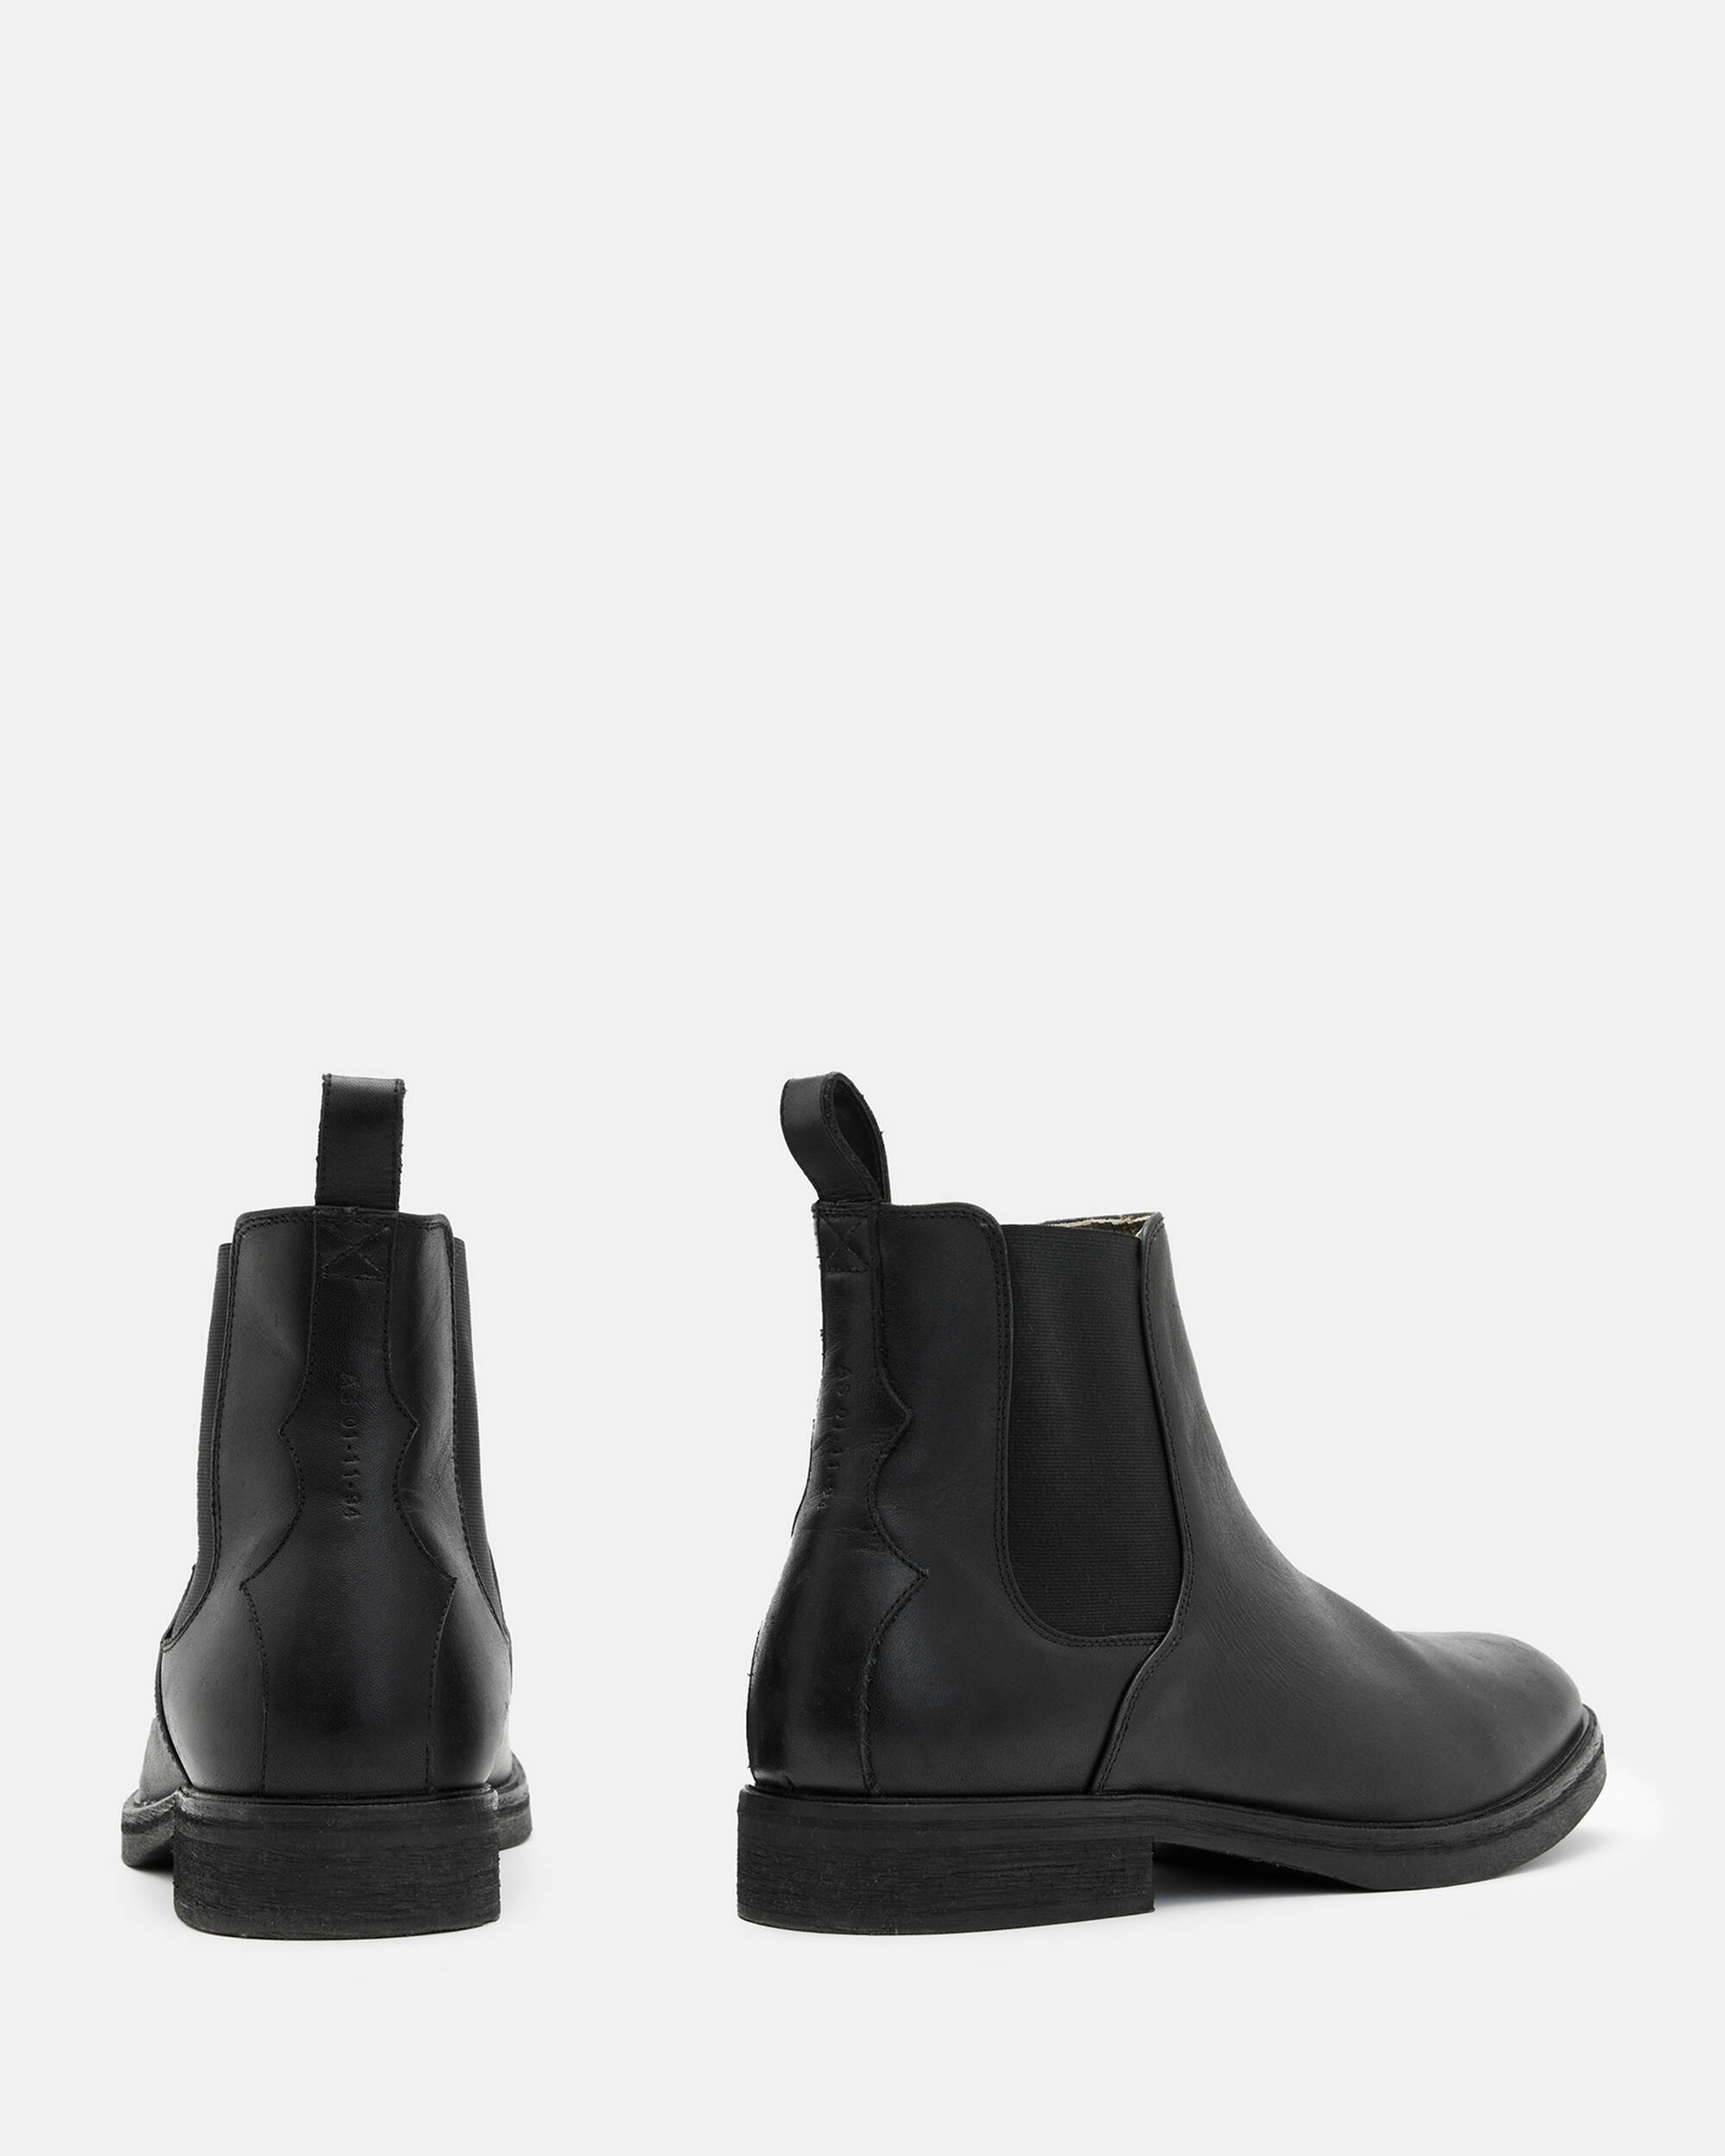 Creed Leather Chelsea Boots Black | ALLSAINTS